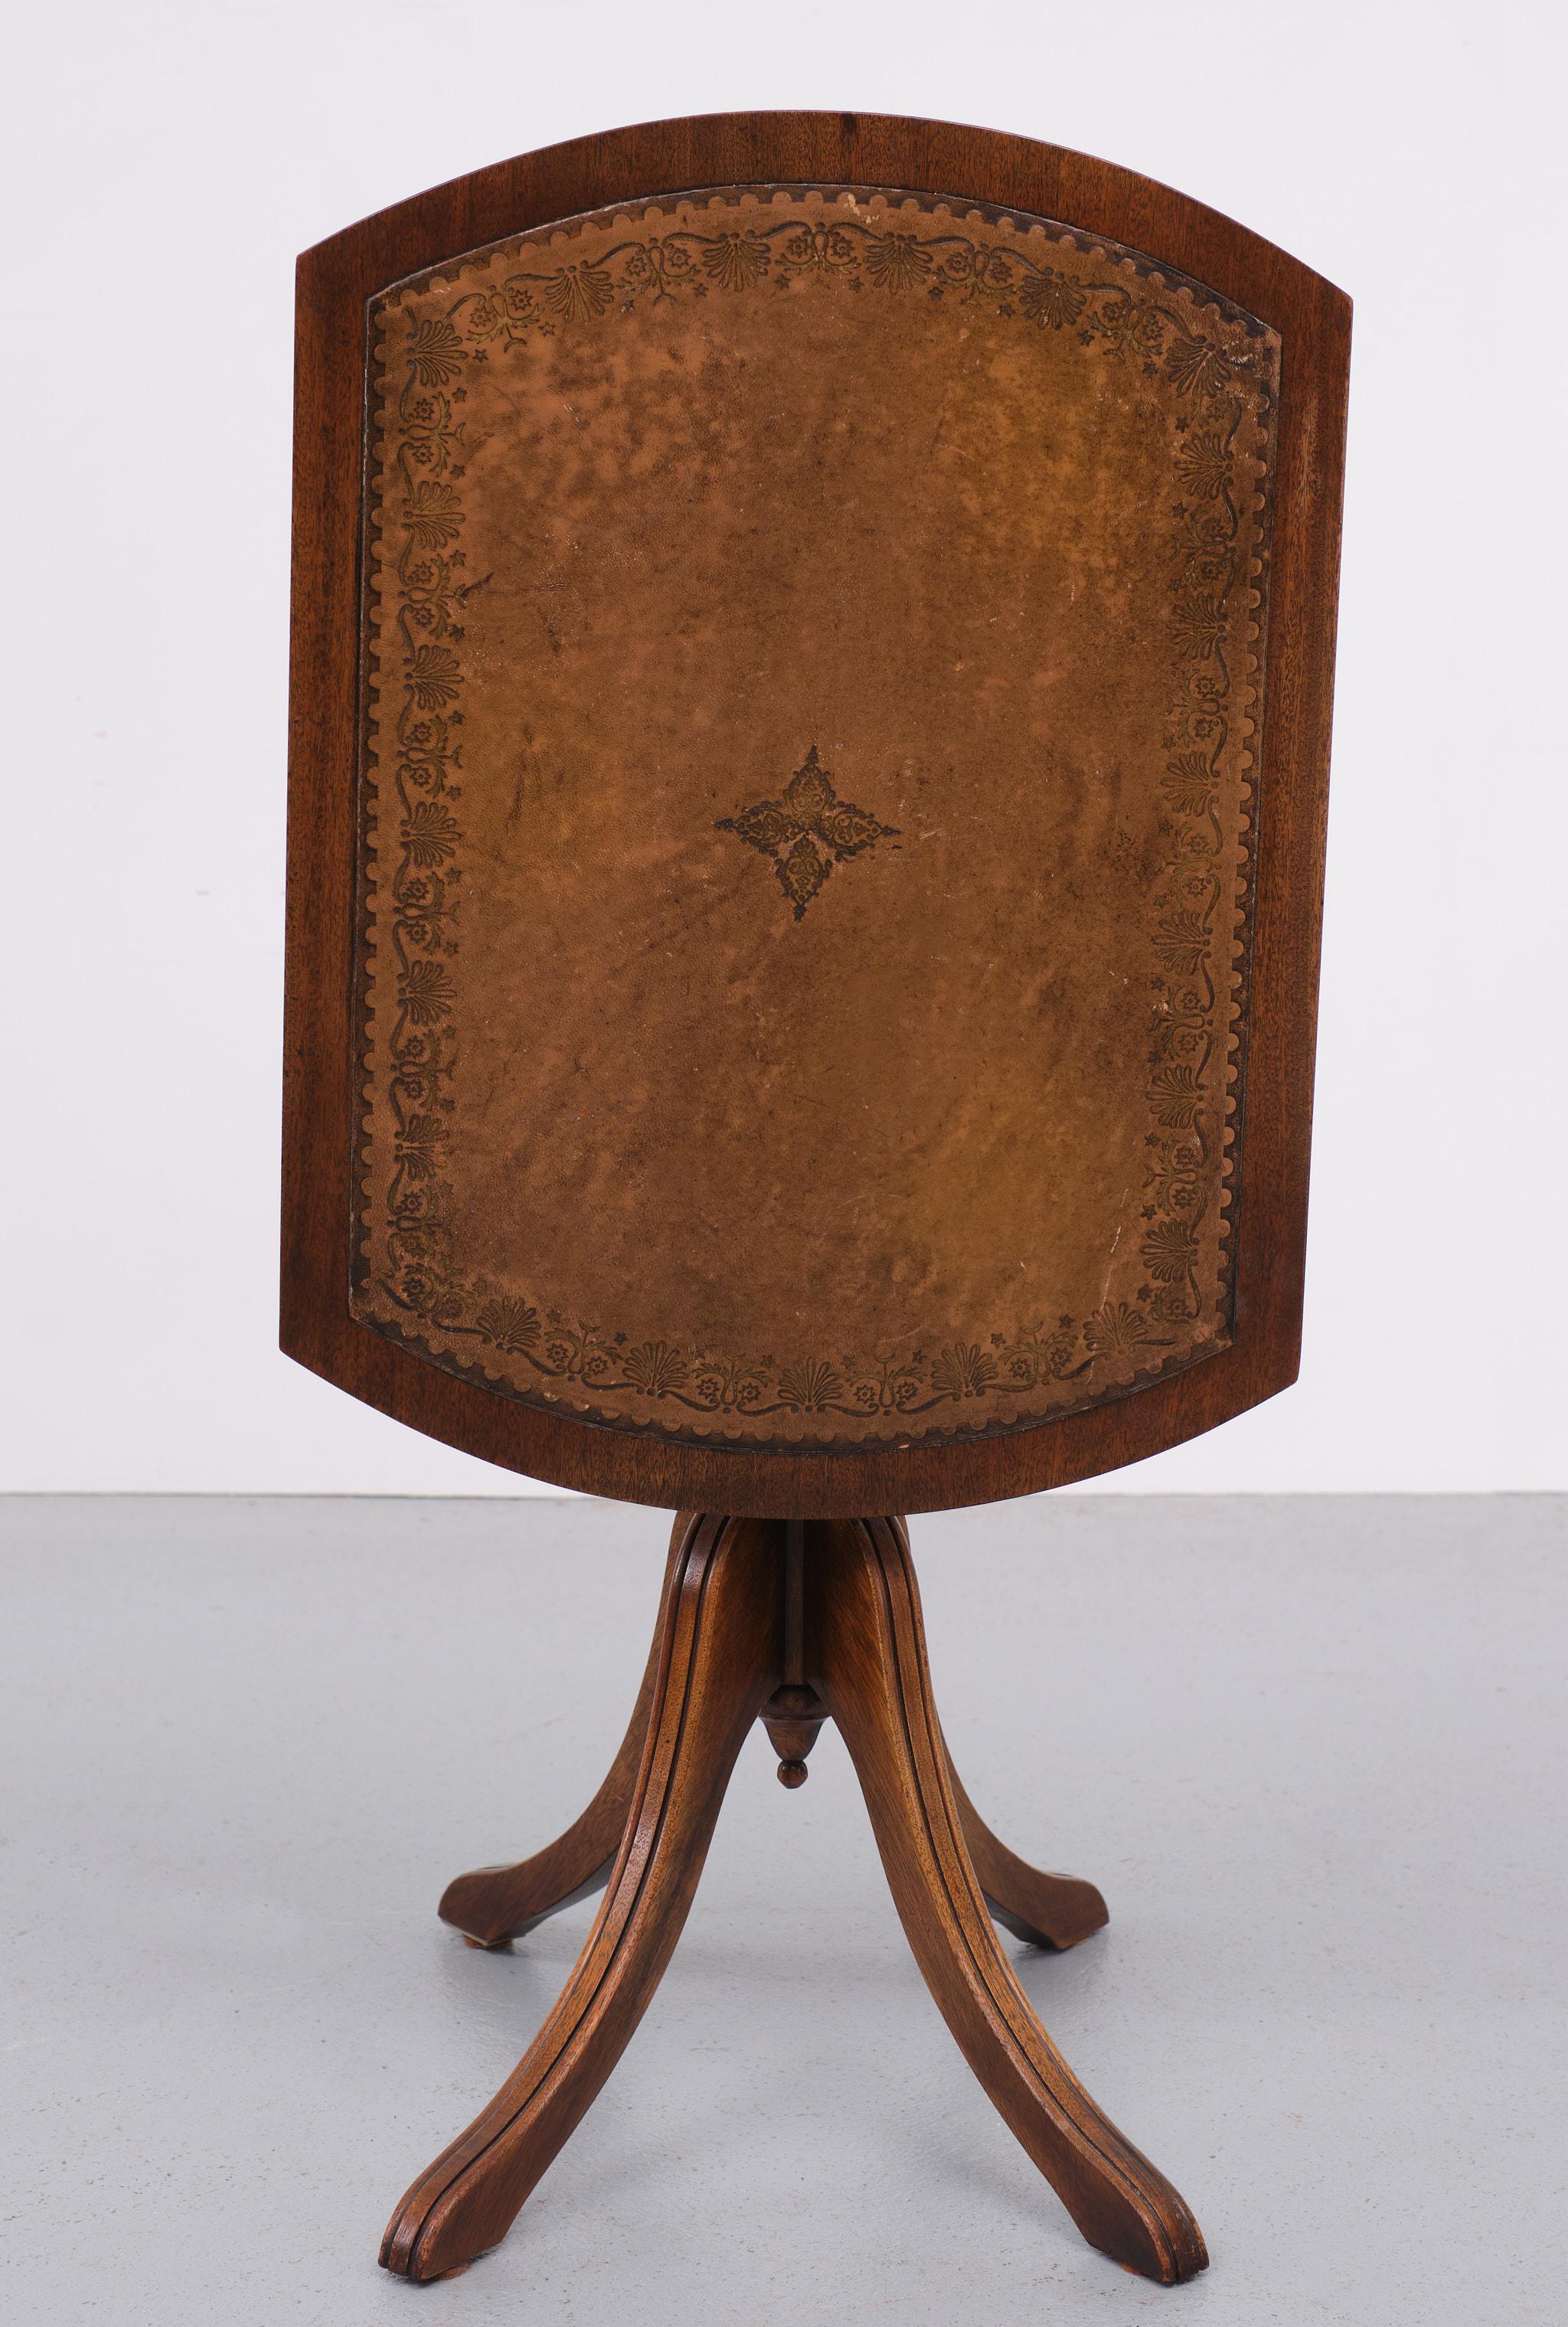 Late 20th Century Bevan Funell Reprodux Tilt Top Wine Table 1970s England For Sale